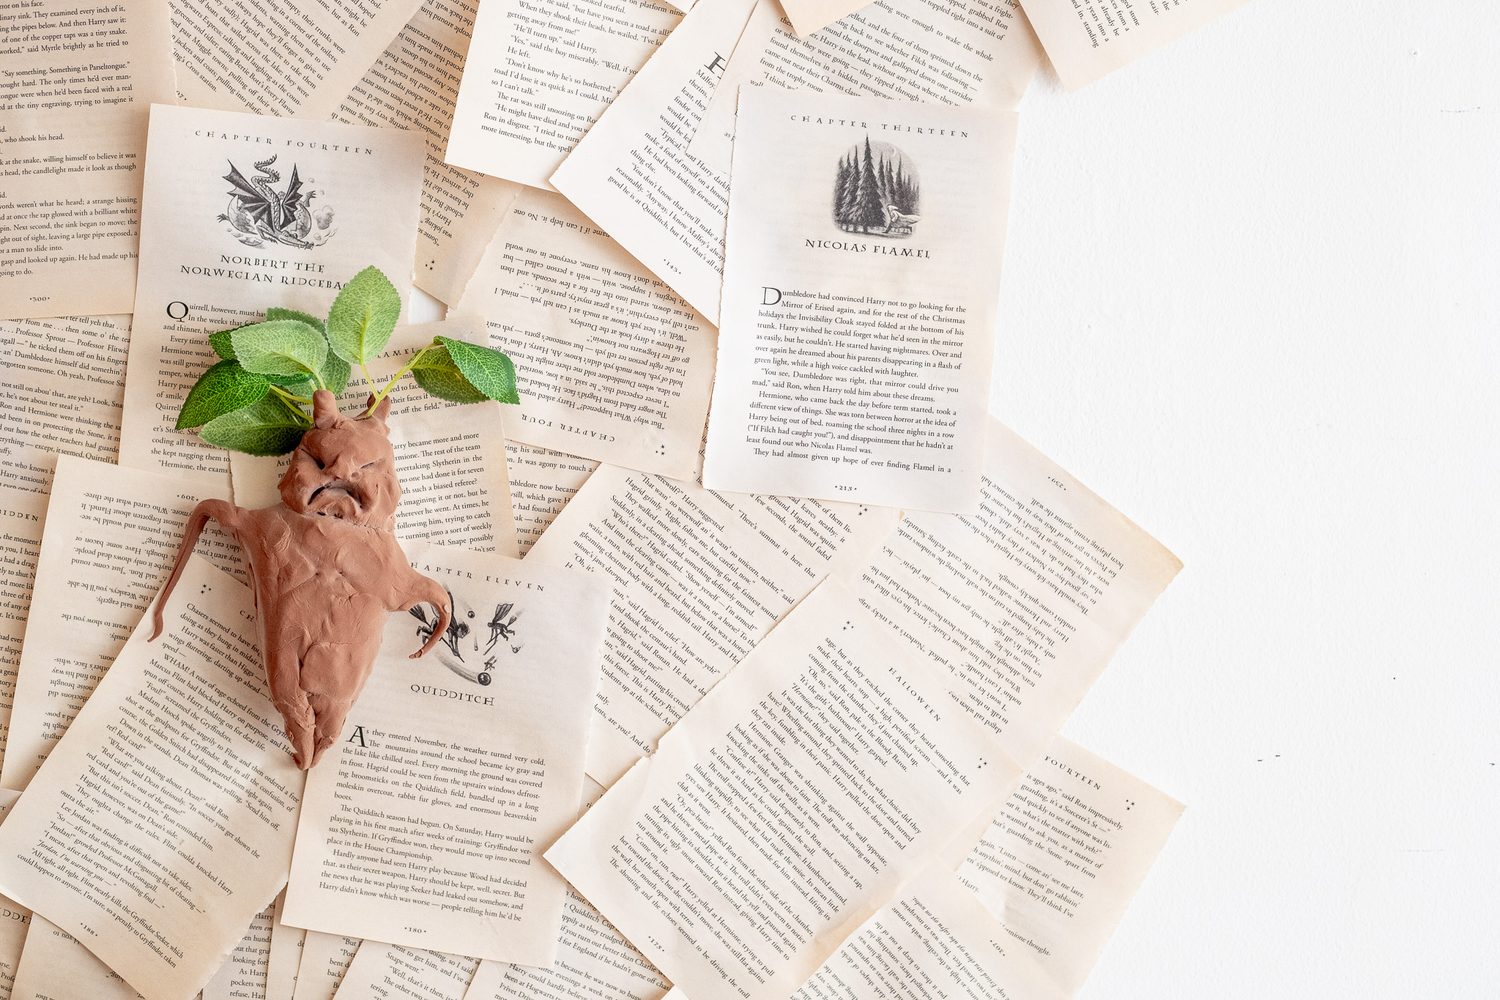 Mandrake on book pages